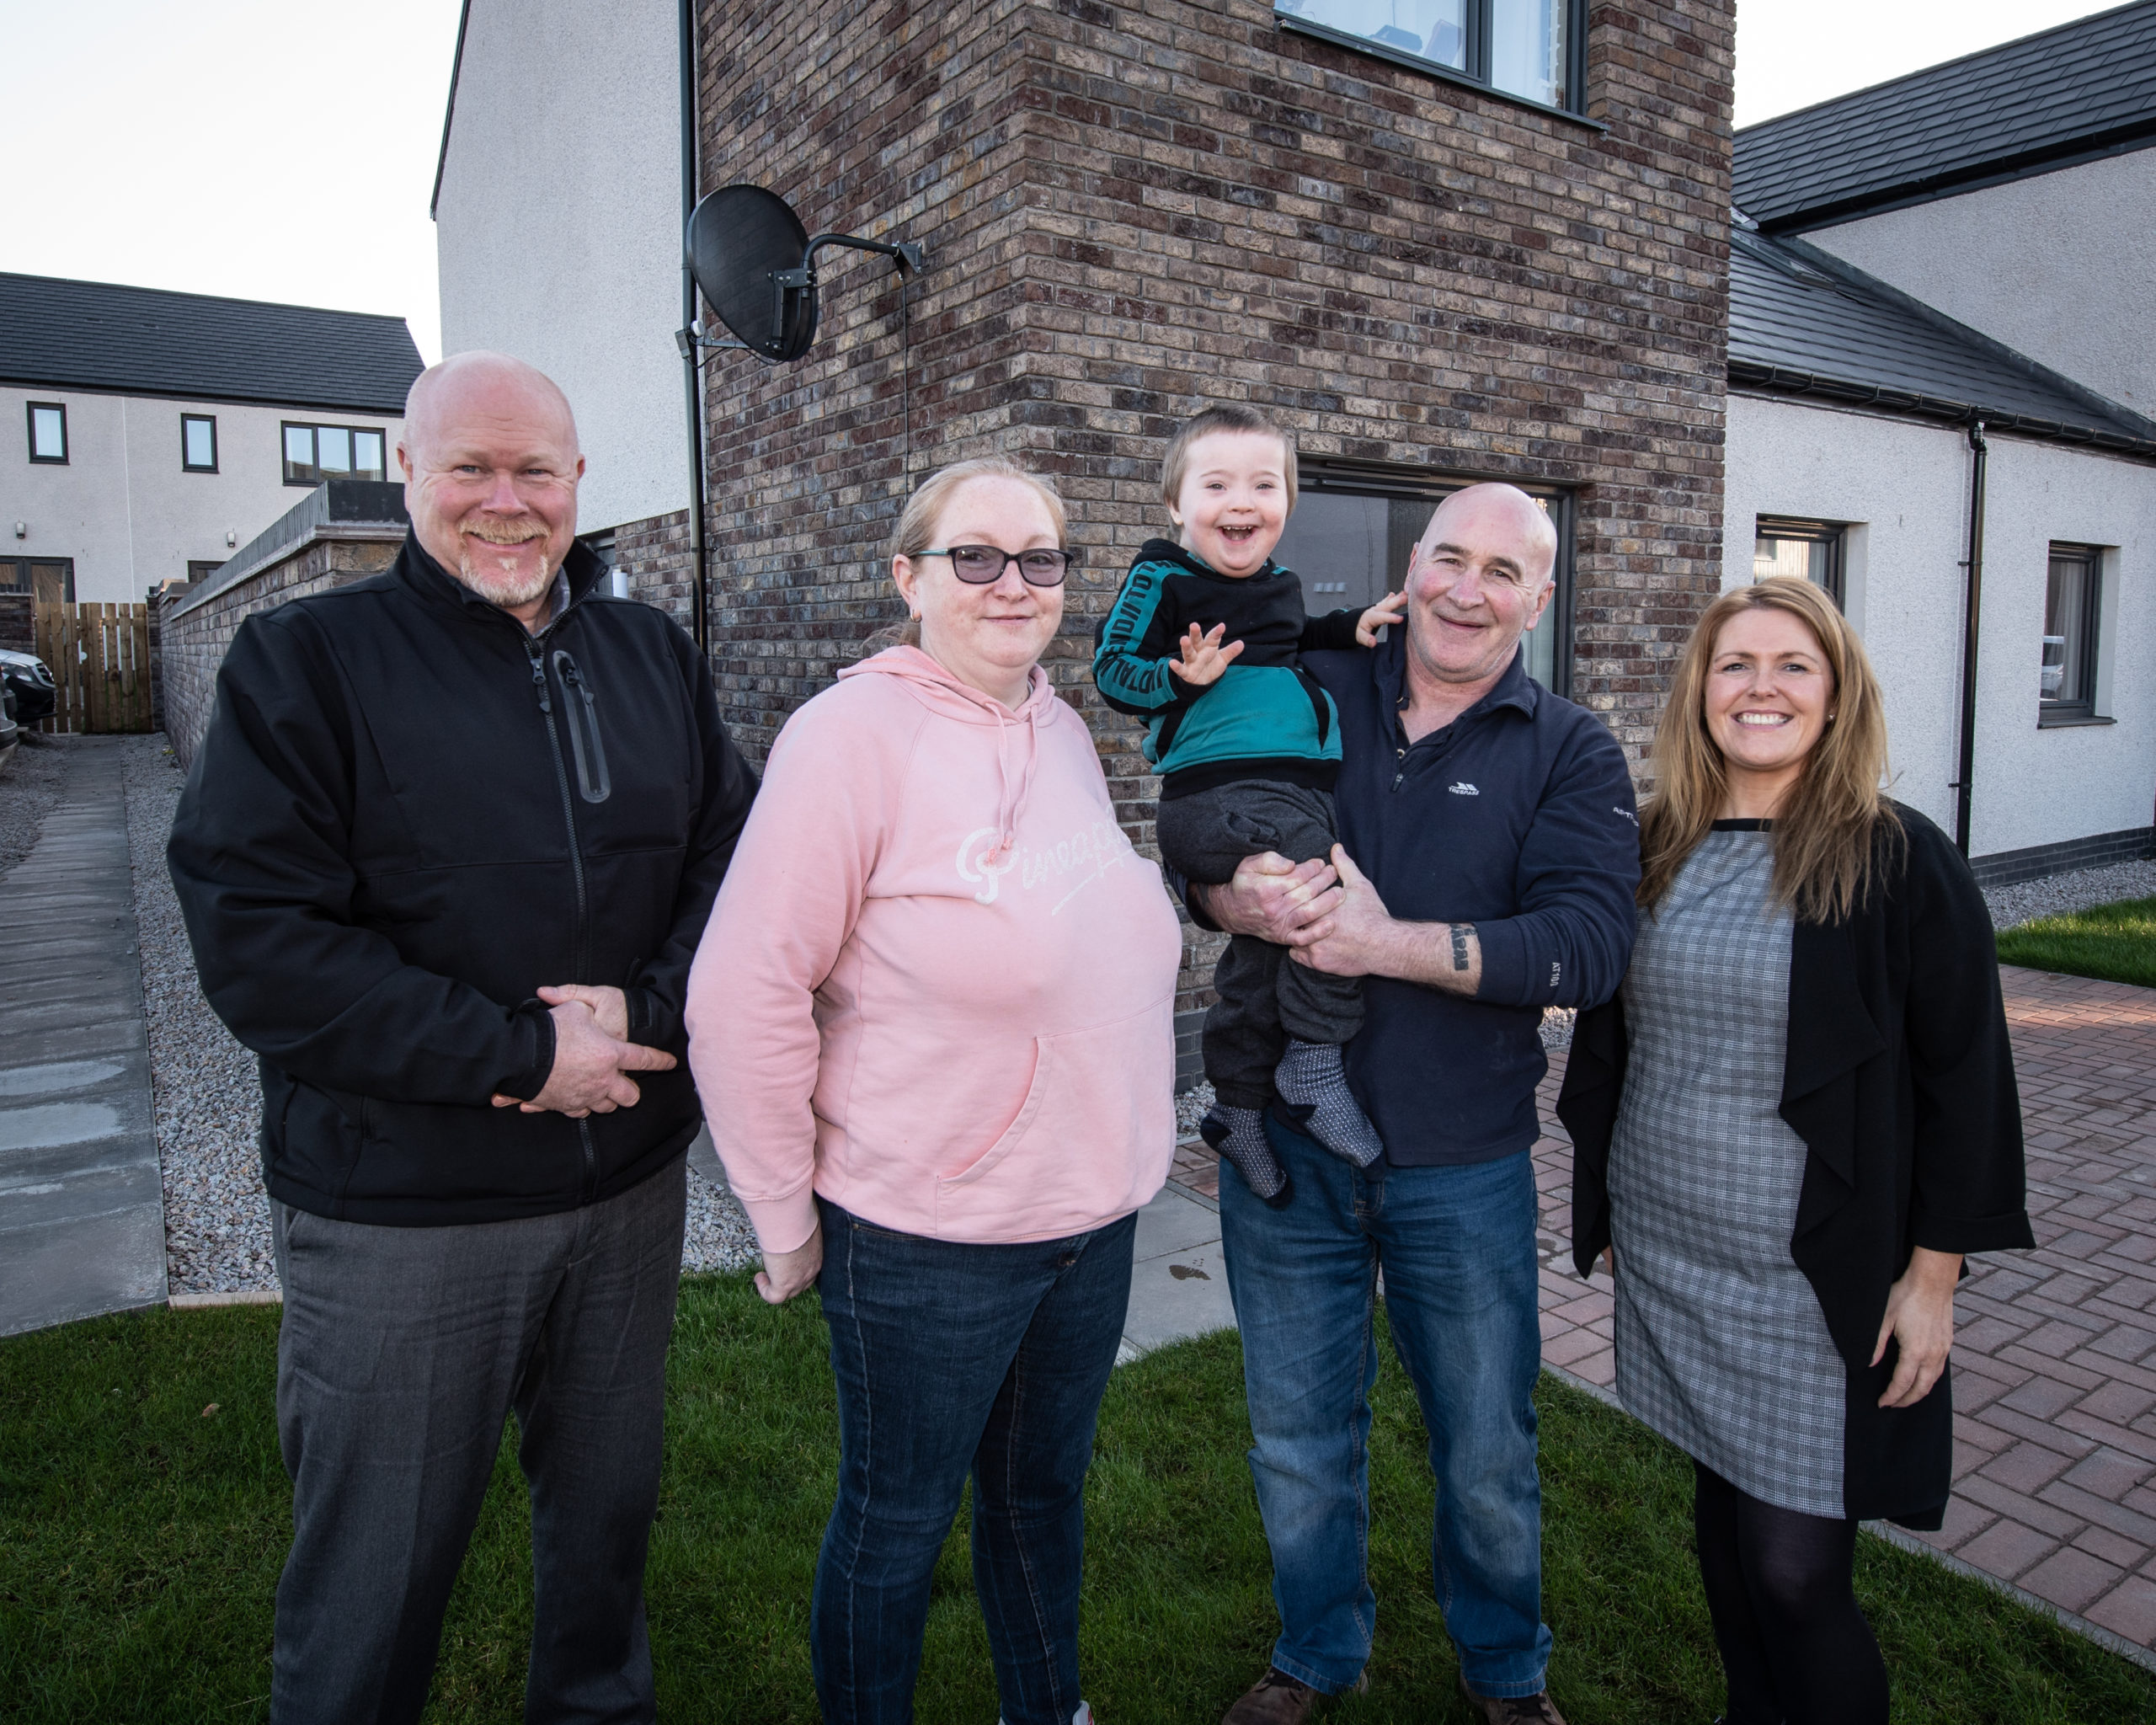 L-R: Allan Liddle, Development Officer Osprey Housing Group, Patricia Logie, Reece Logie, Kevin Logie and Stacy Angus, Osprey’s Housing Services Manager